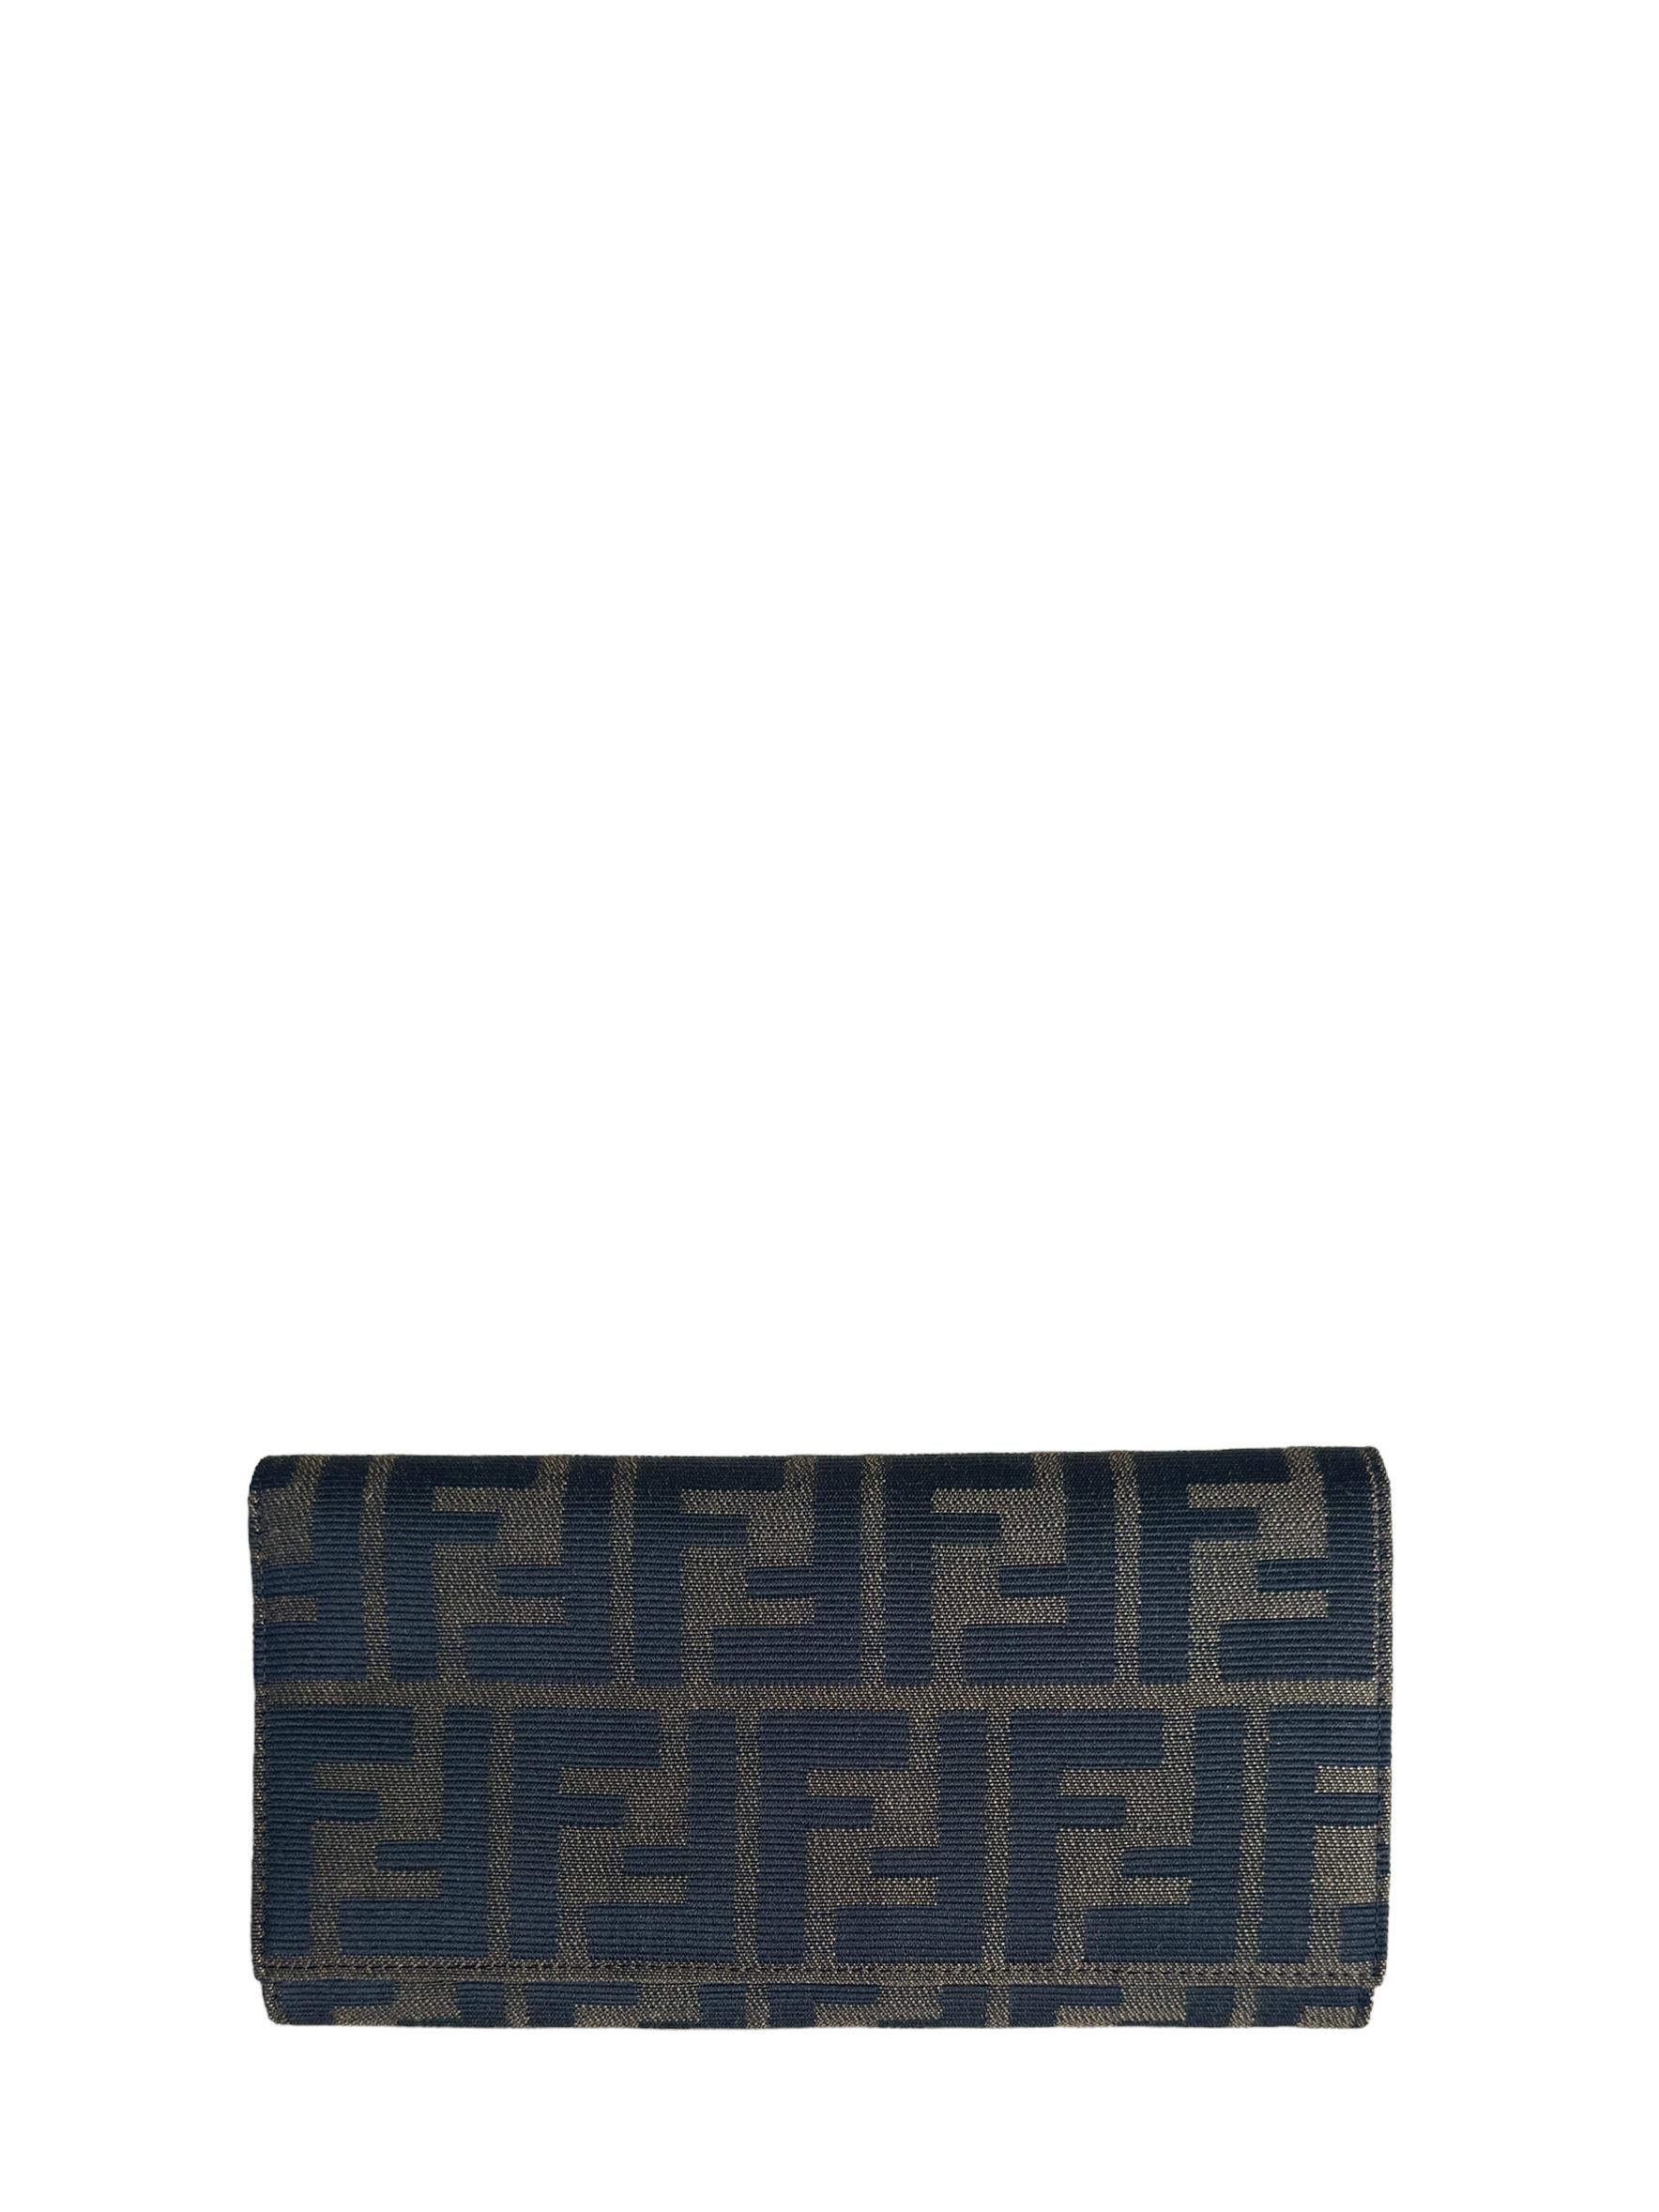 Fendi Canvas Tobacco Monogram Zucca Wallet

Made In: Italy
Year of Production: Vintage
Color: Tobacco brown
Materials: Canvas with leather interior
Two slit bill slots, one compartment for receipts and bills, one zip coin compartment, six credit